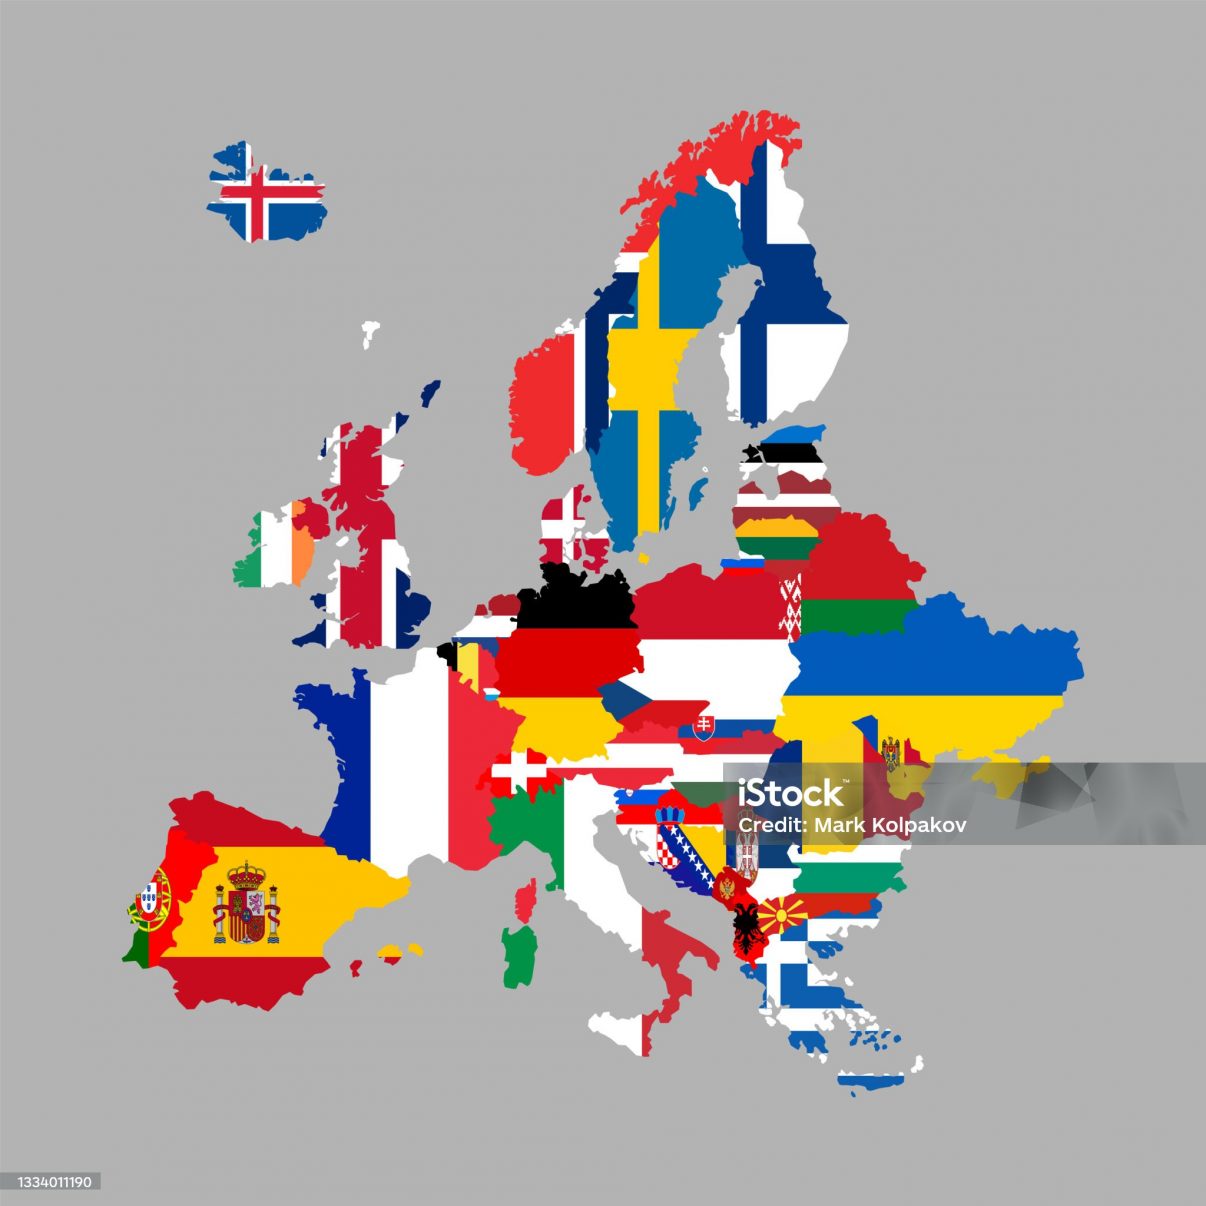 Europe map and flag icons. Geography borders of European countries. Vector illustration